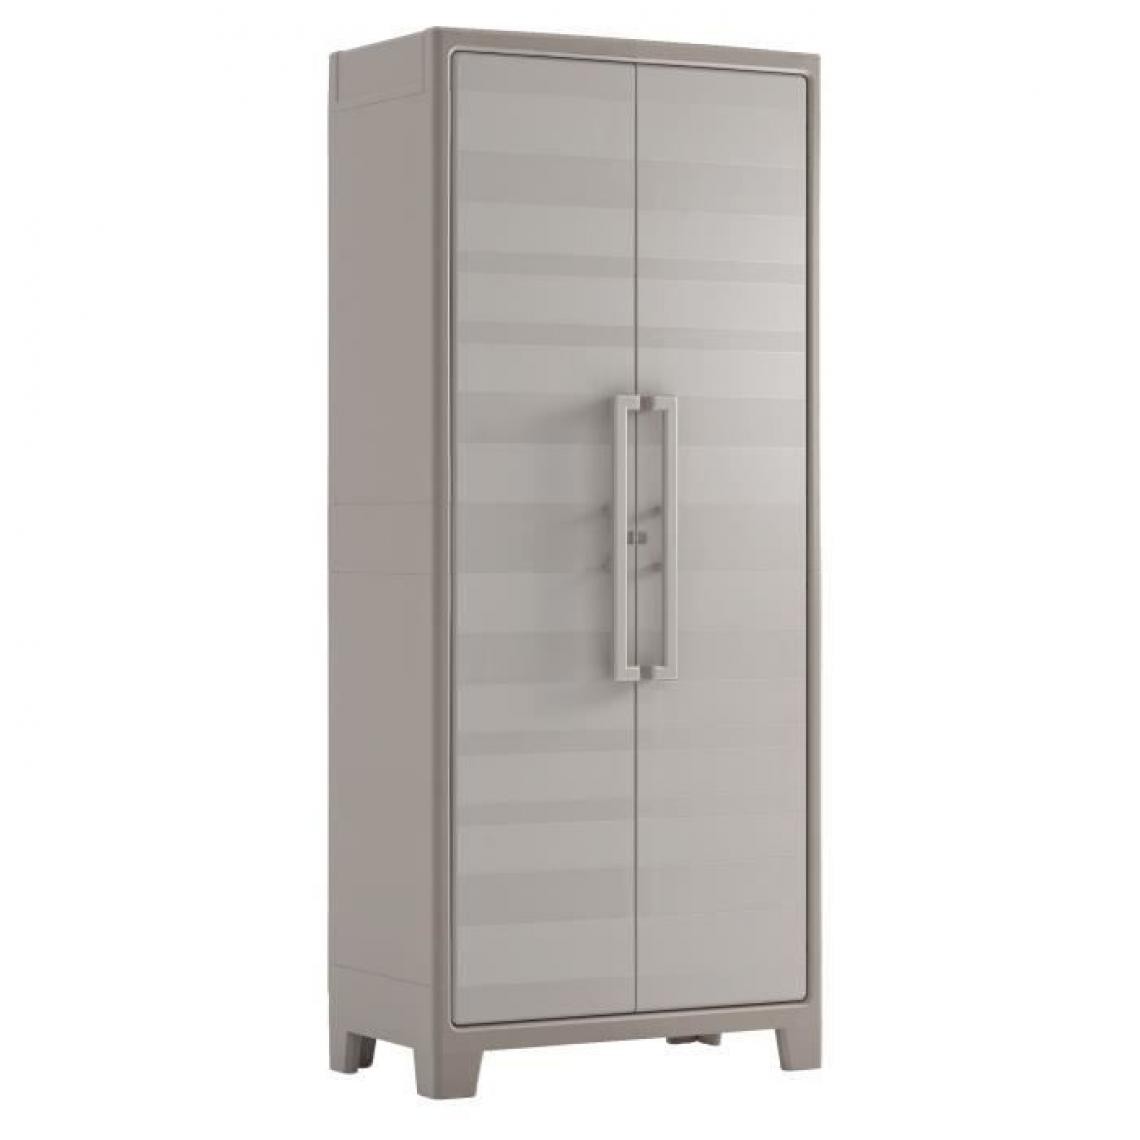 Keter - Armoire Utilitaire GULLIVER - Beige Sable - Armoires